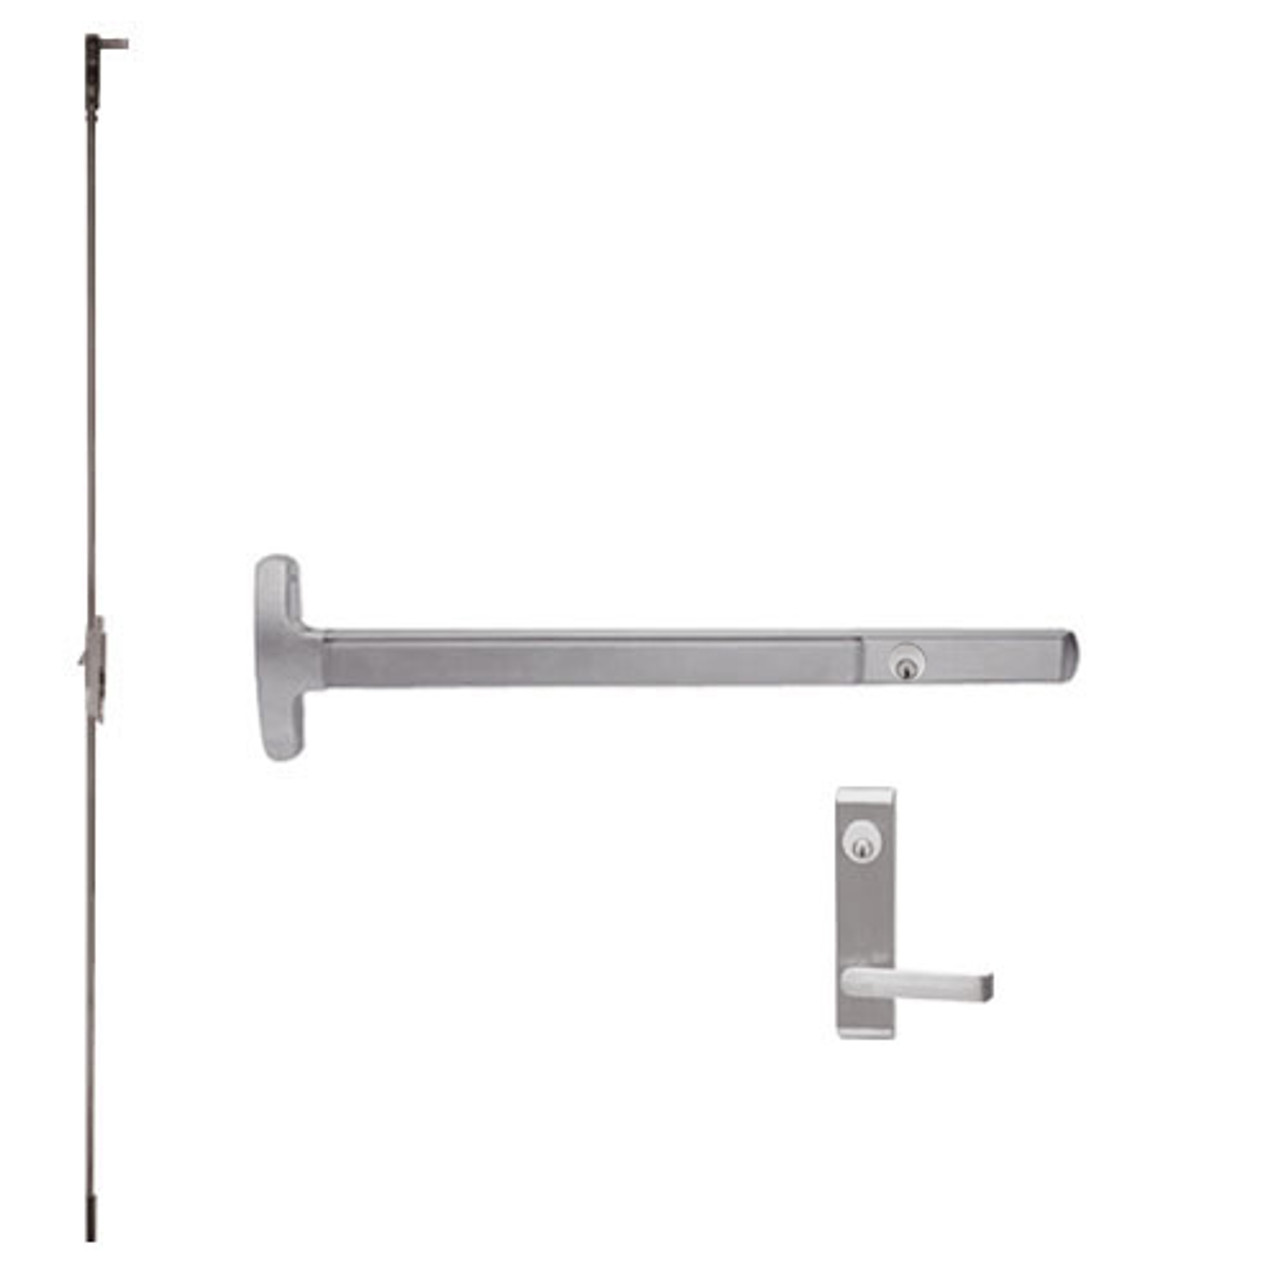 CD24-C-L-NL-DANE-US32D-4-RHR Falcon Exit Device in Satin Stainless Steel